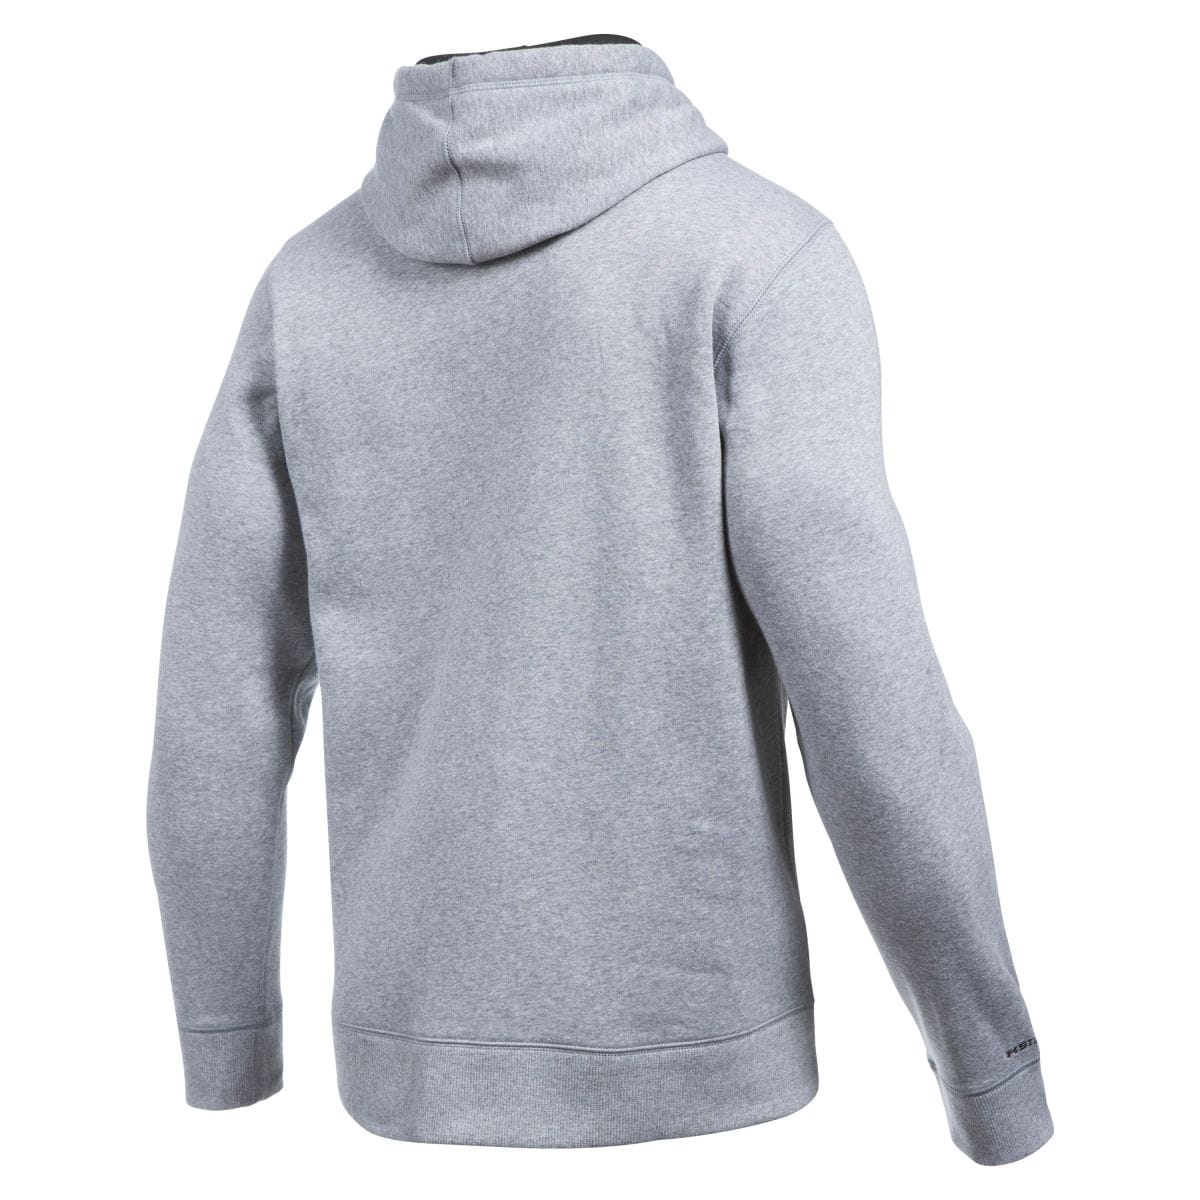 Under Armour Pullover Storm Rival gray